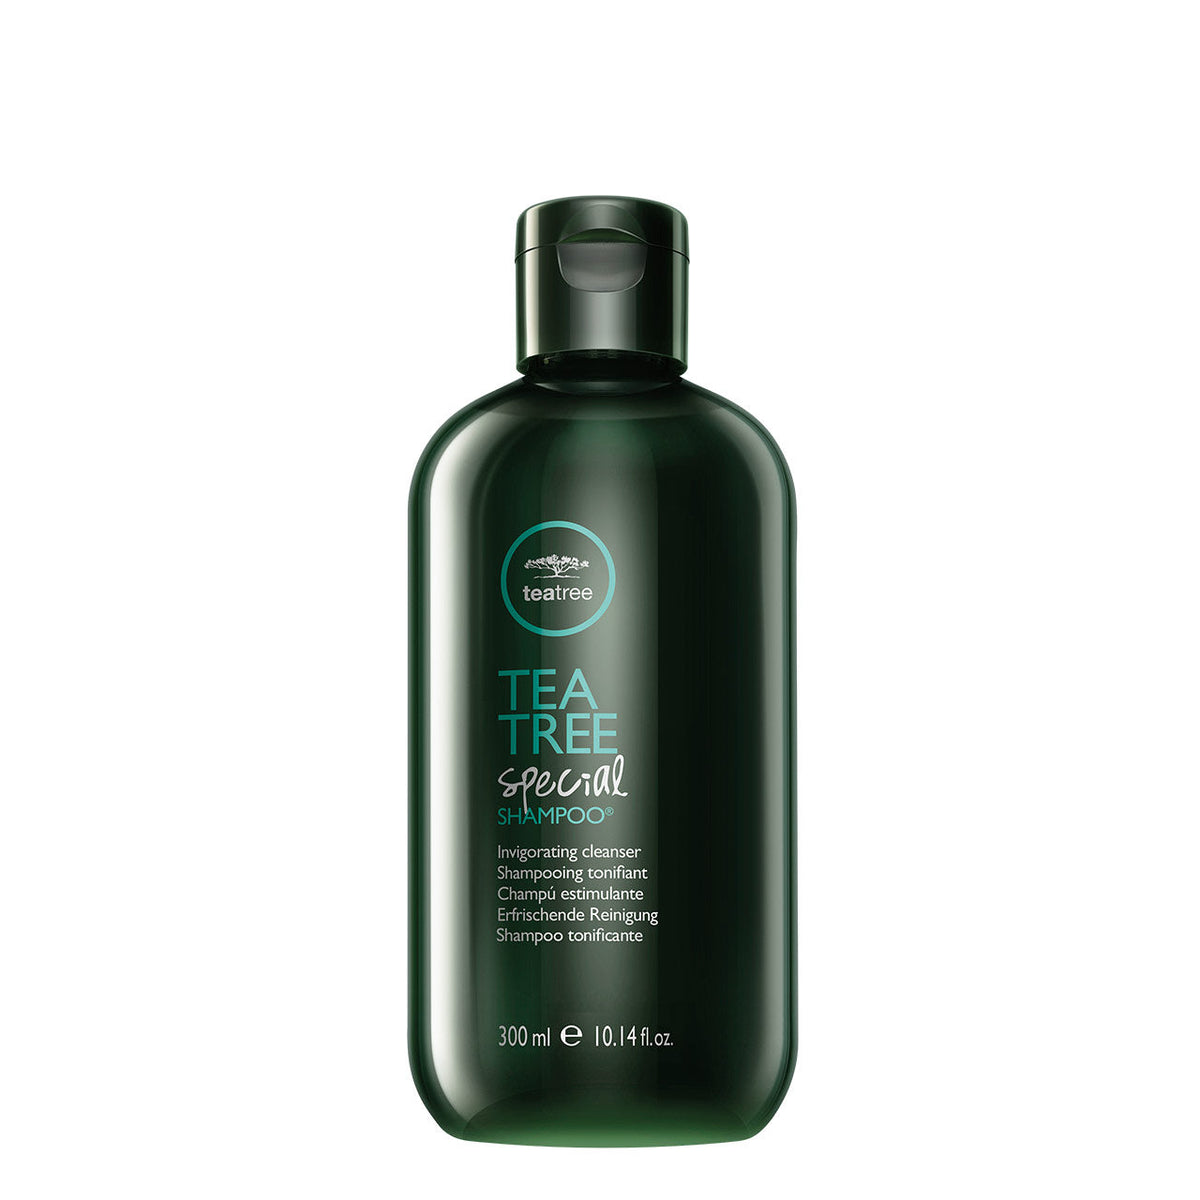 Tea Tree Special Shampoo - 300ML - by Paul Mitchell |ProCare Outlet|